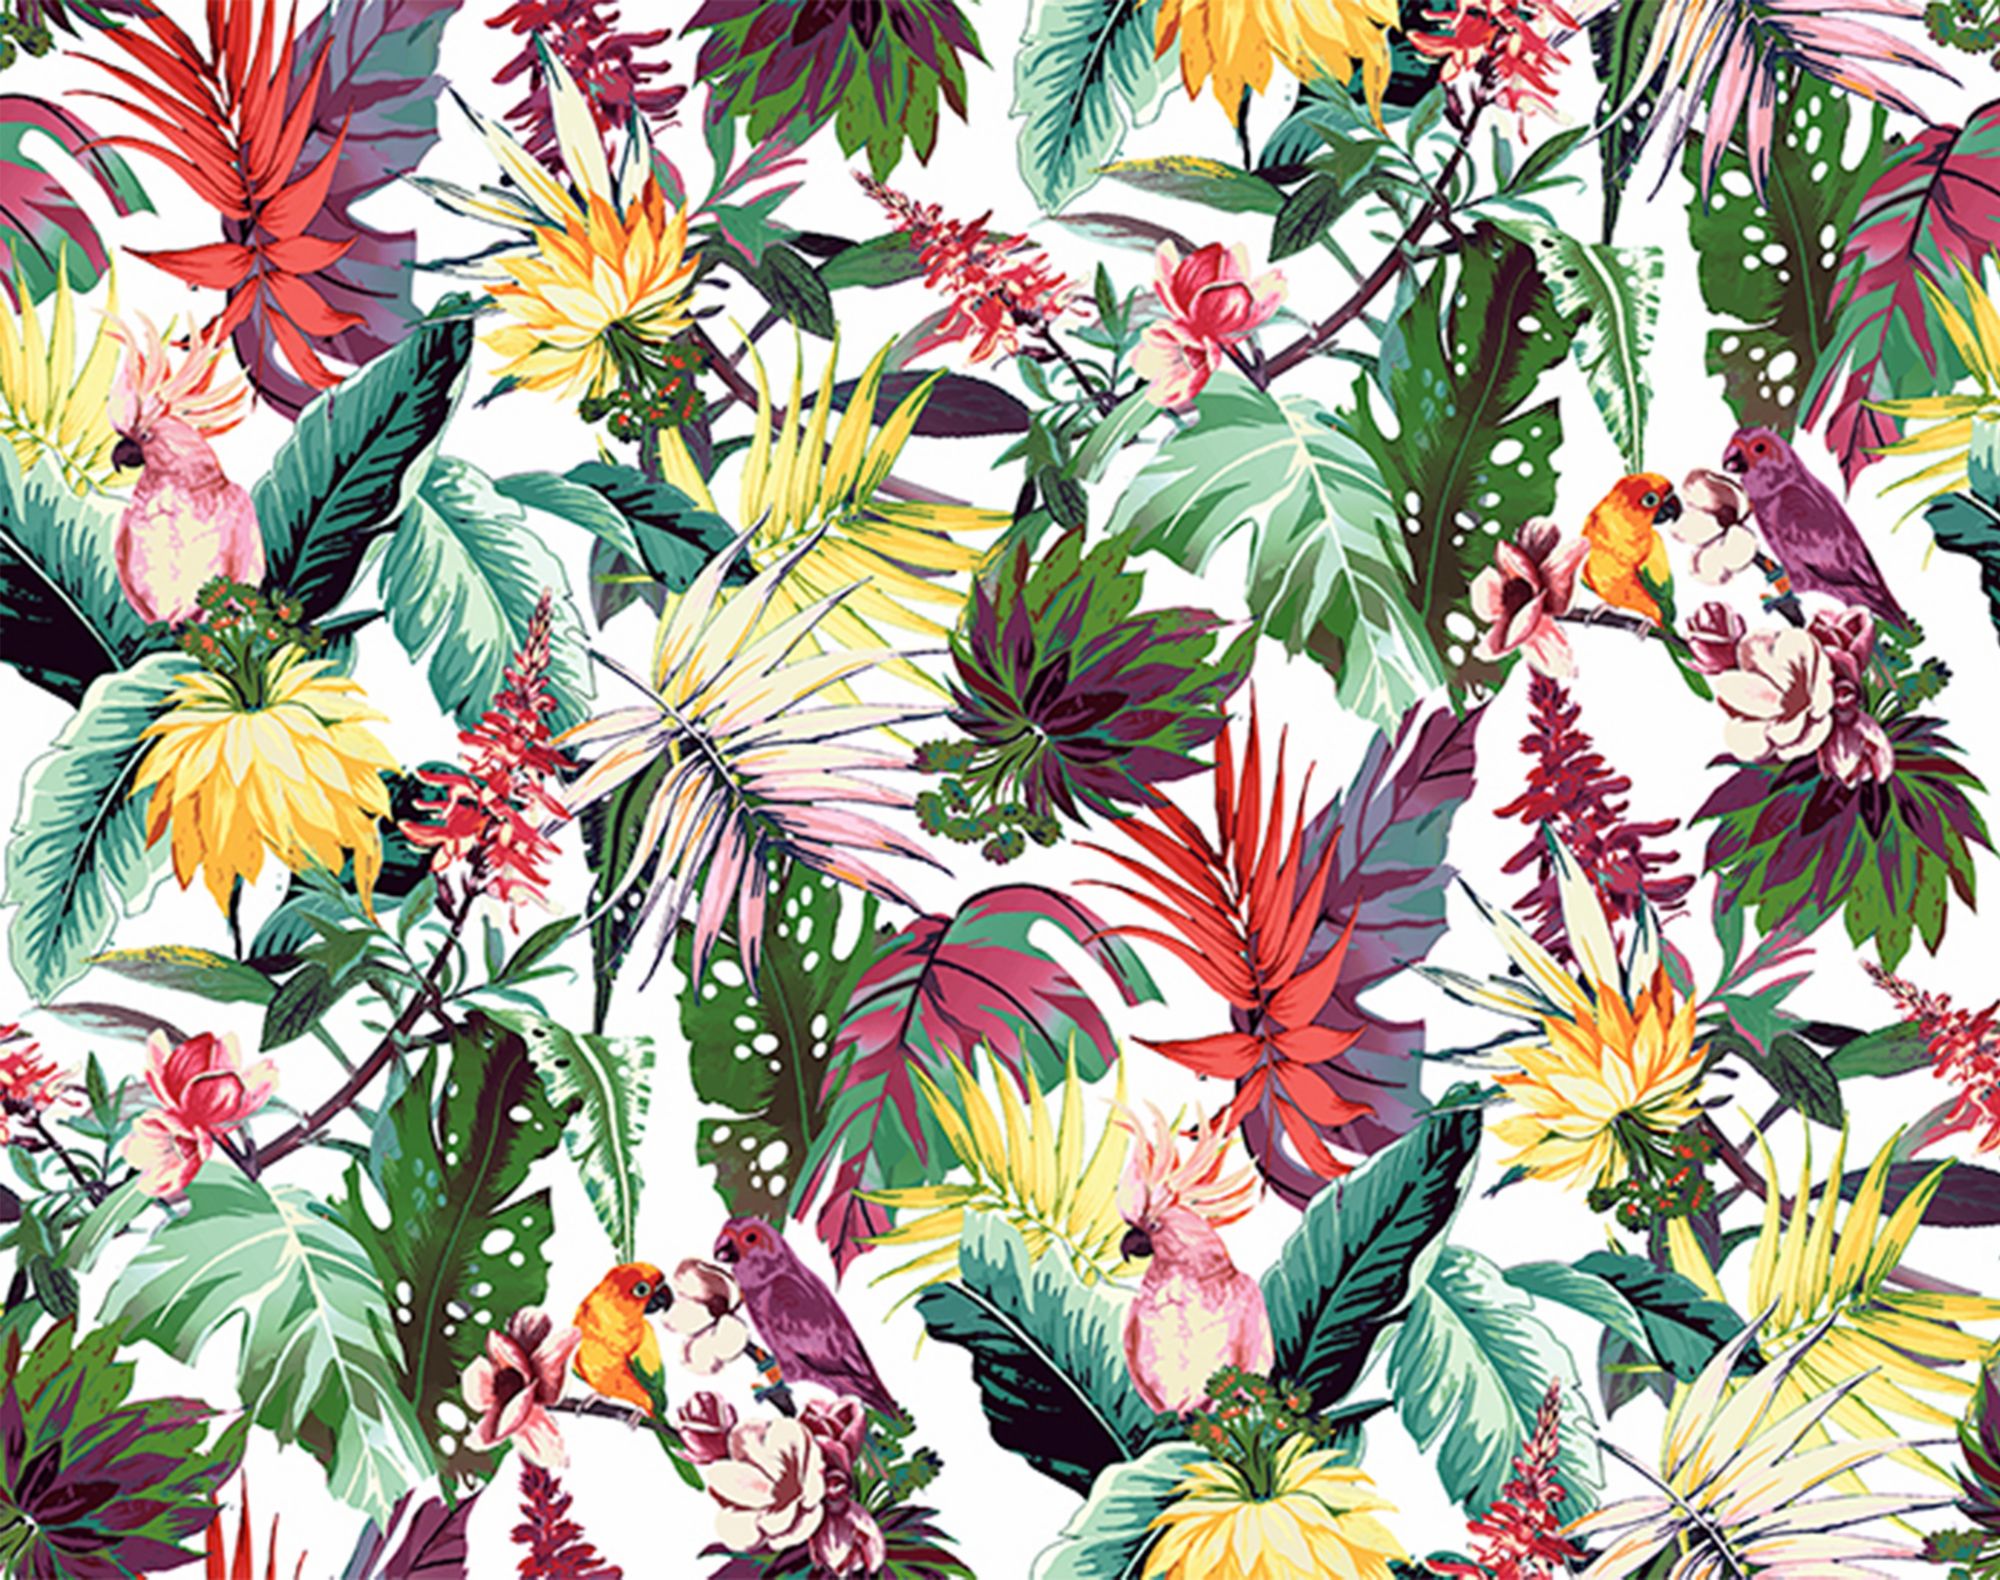 Tropical plants and parrots colorful pattern 